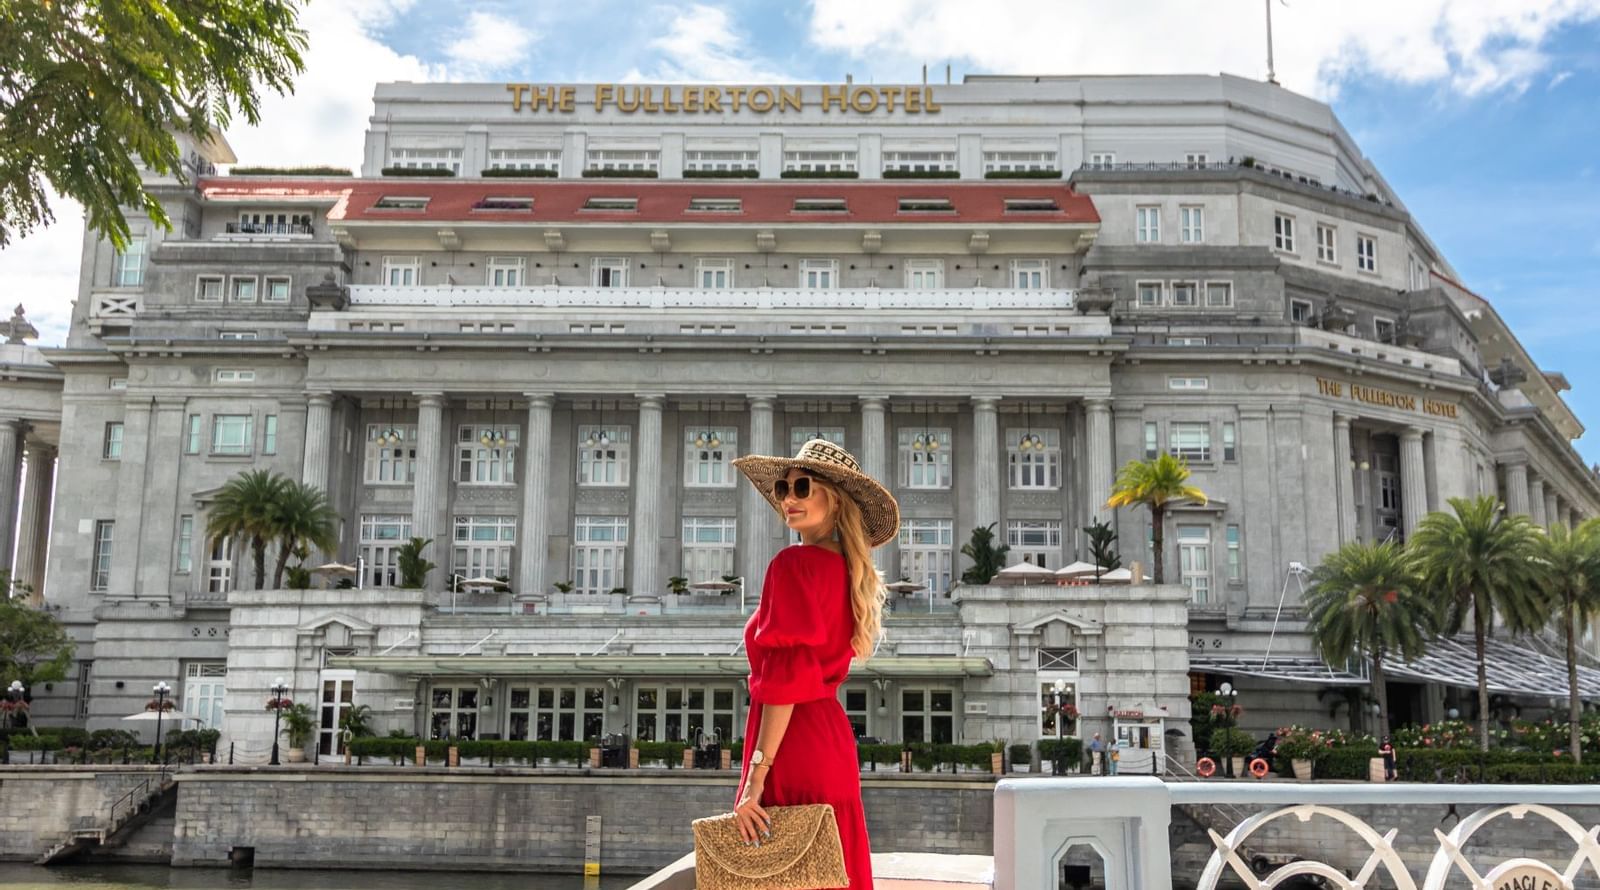 A lady in red posing at the entrance of Fullerton Singapore